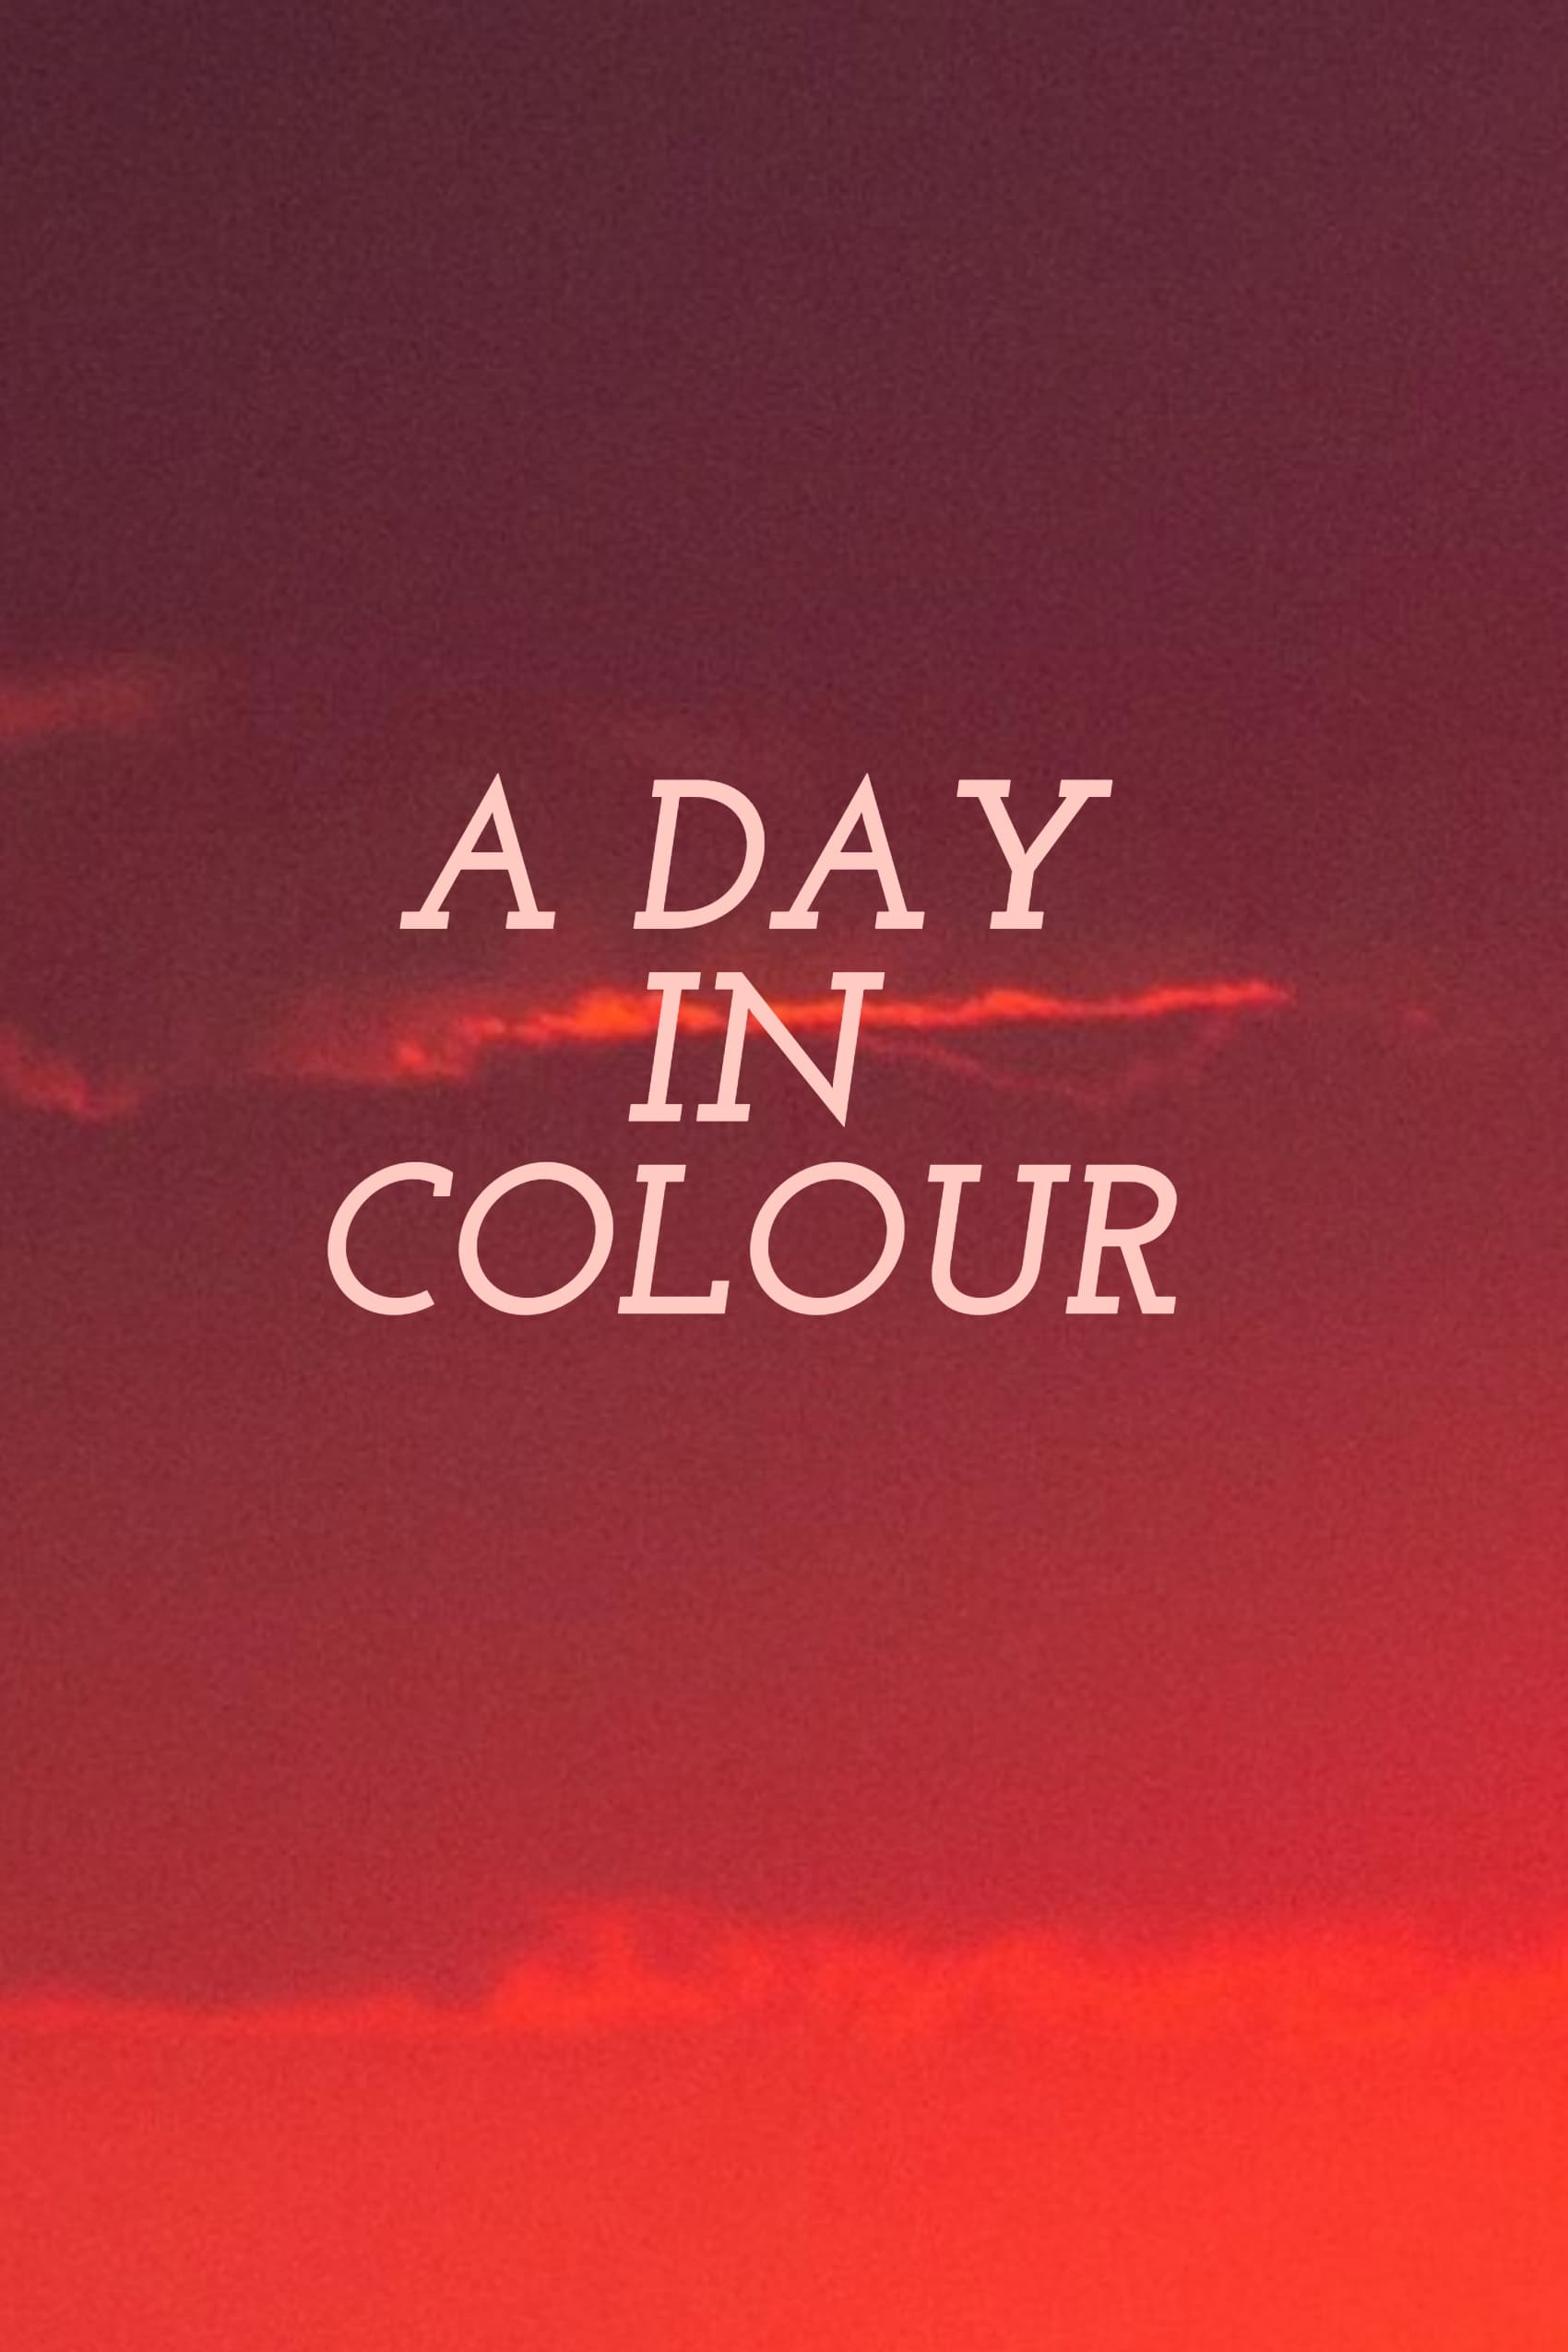 A Day in Colour